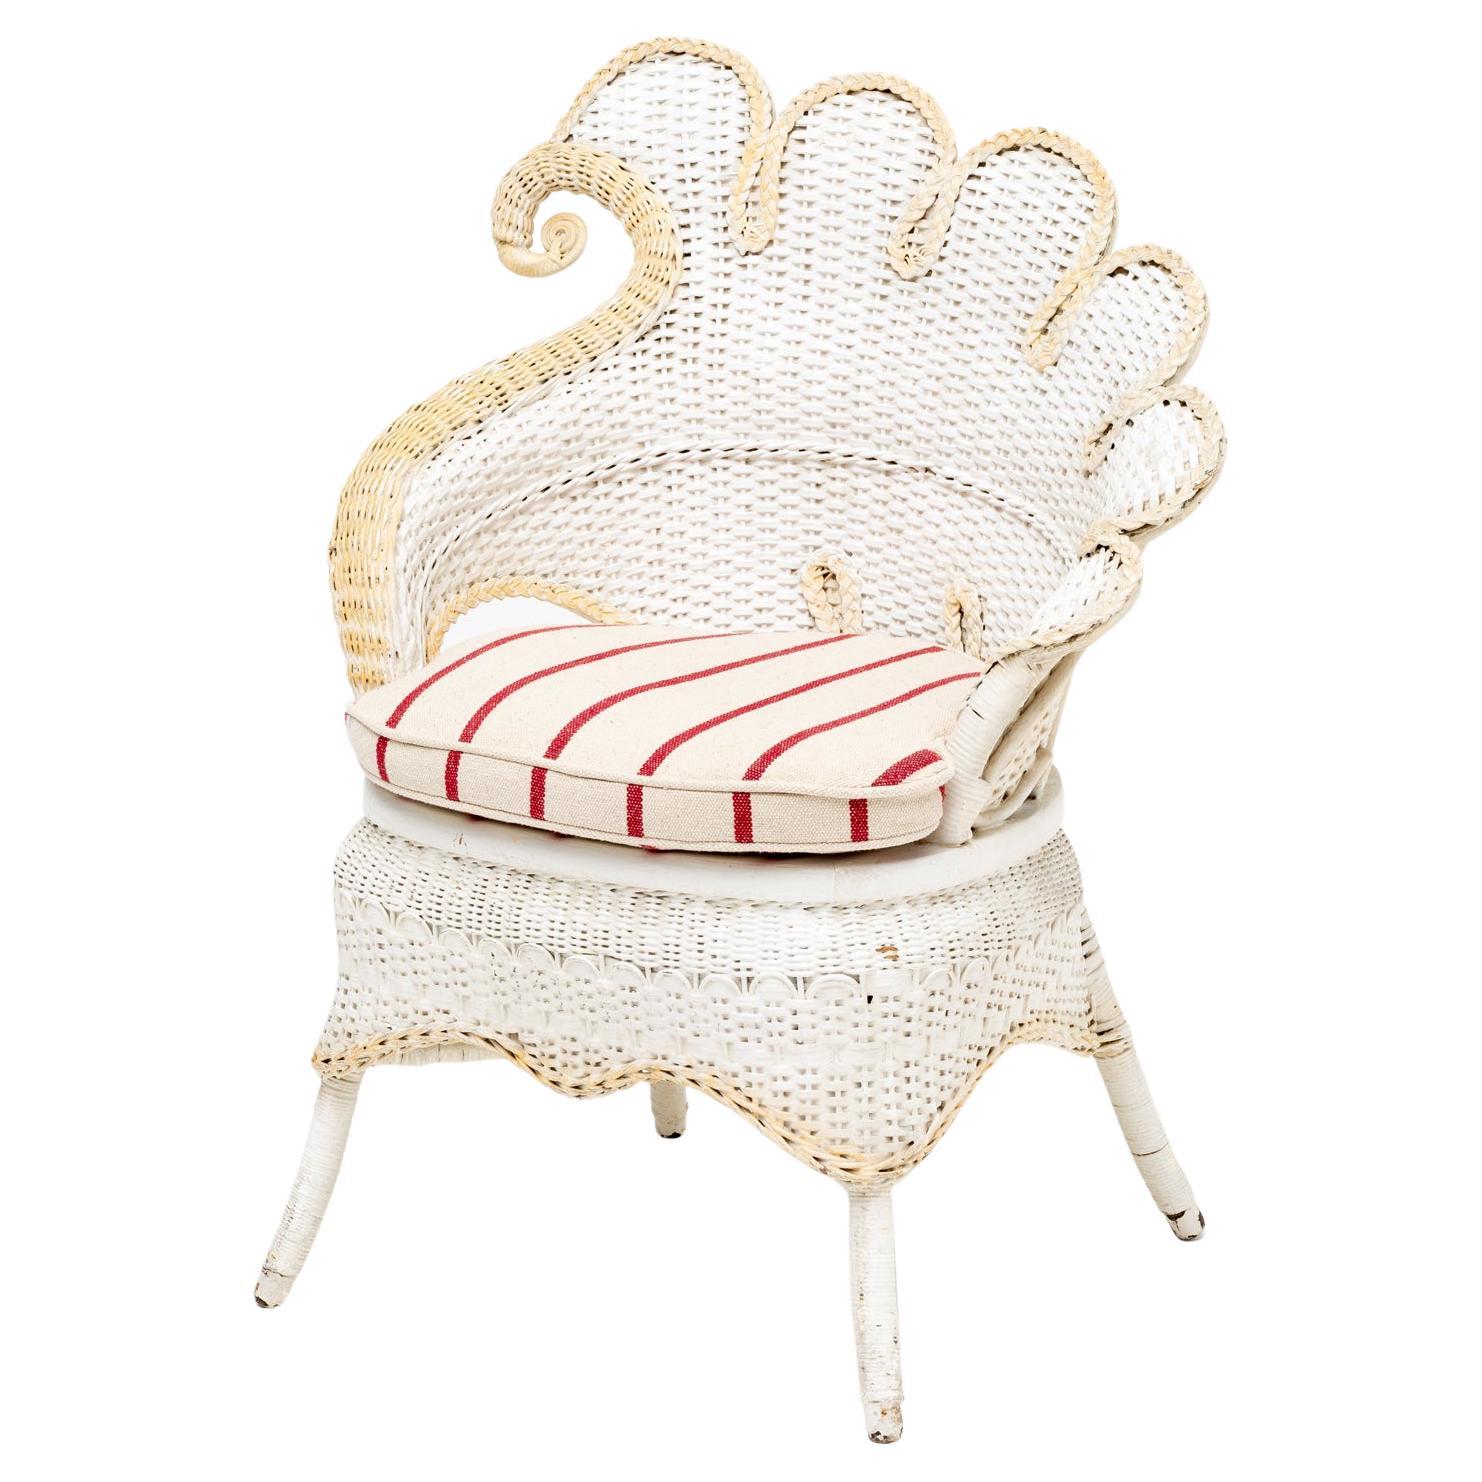 XX Century Rattan Chair painted in white